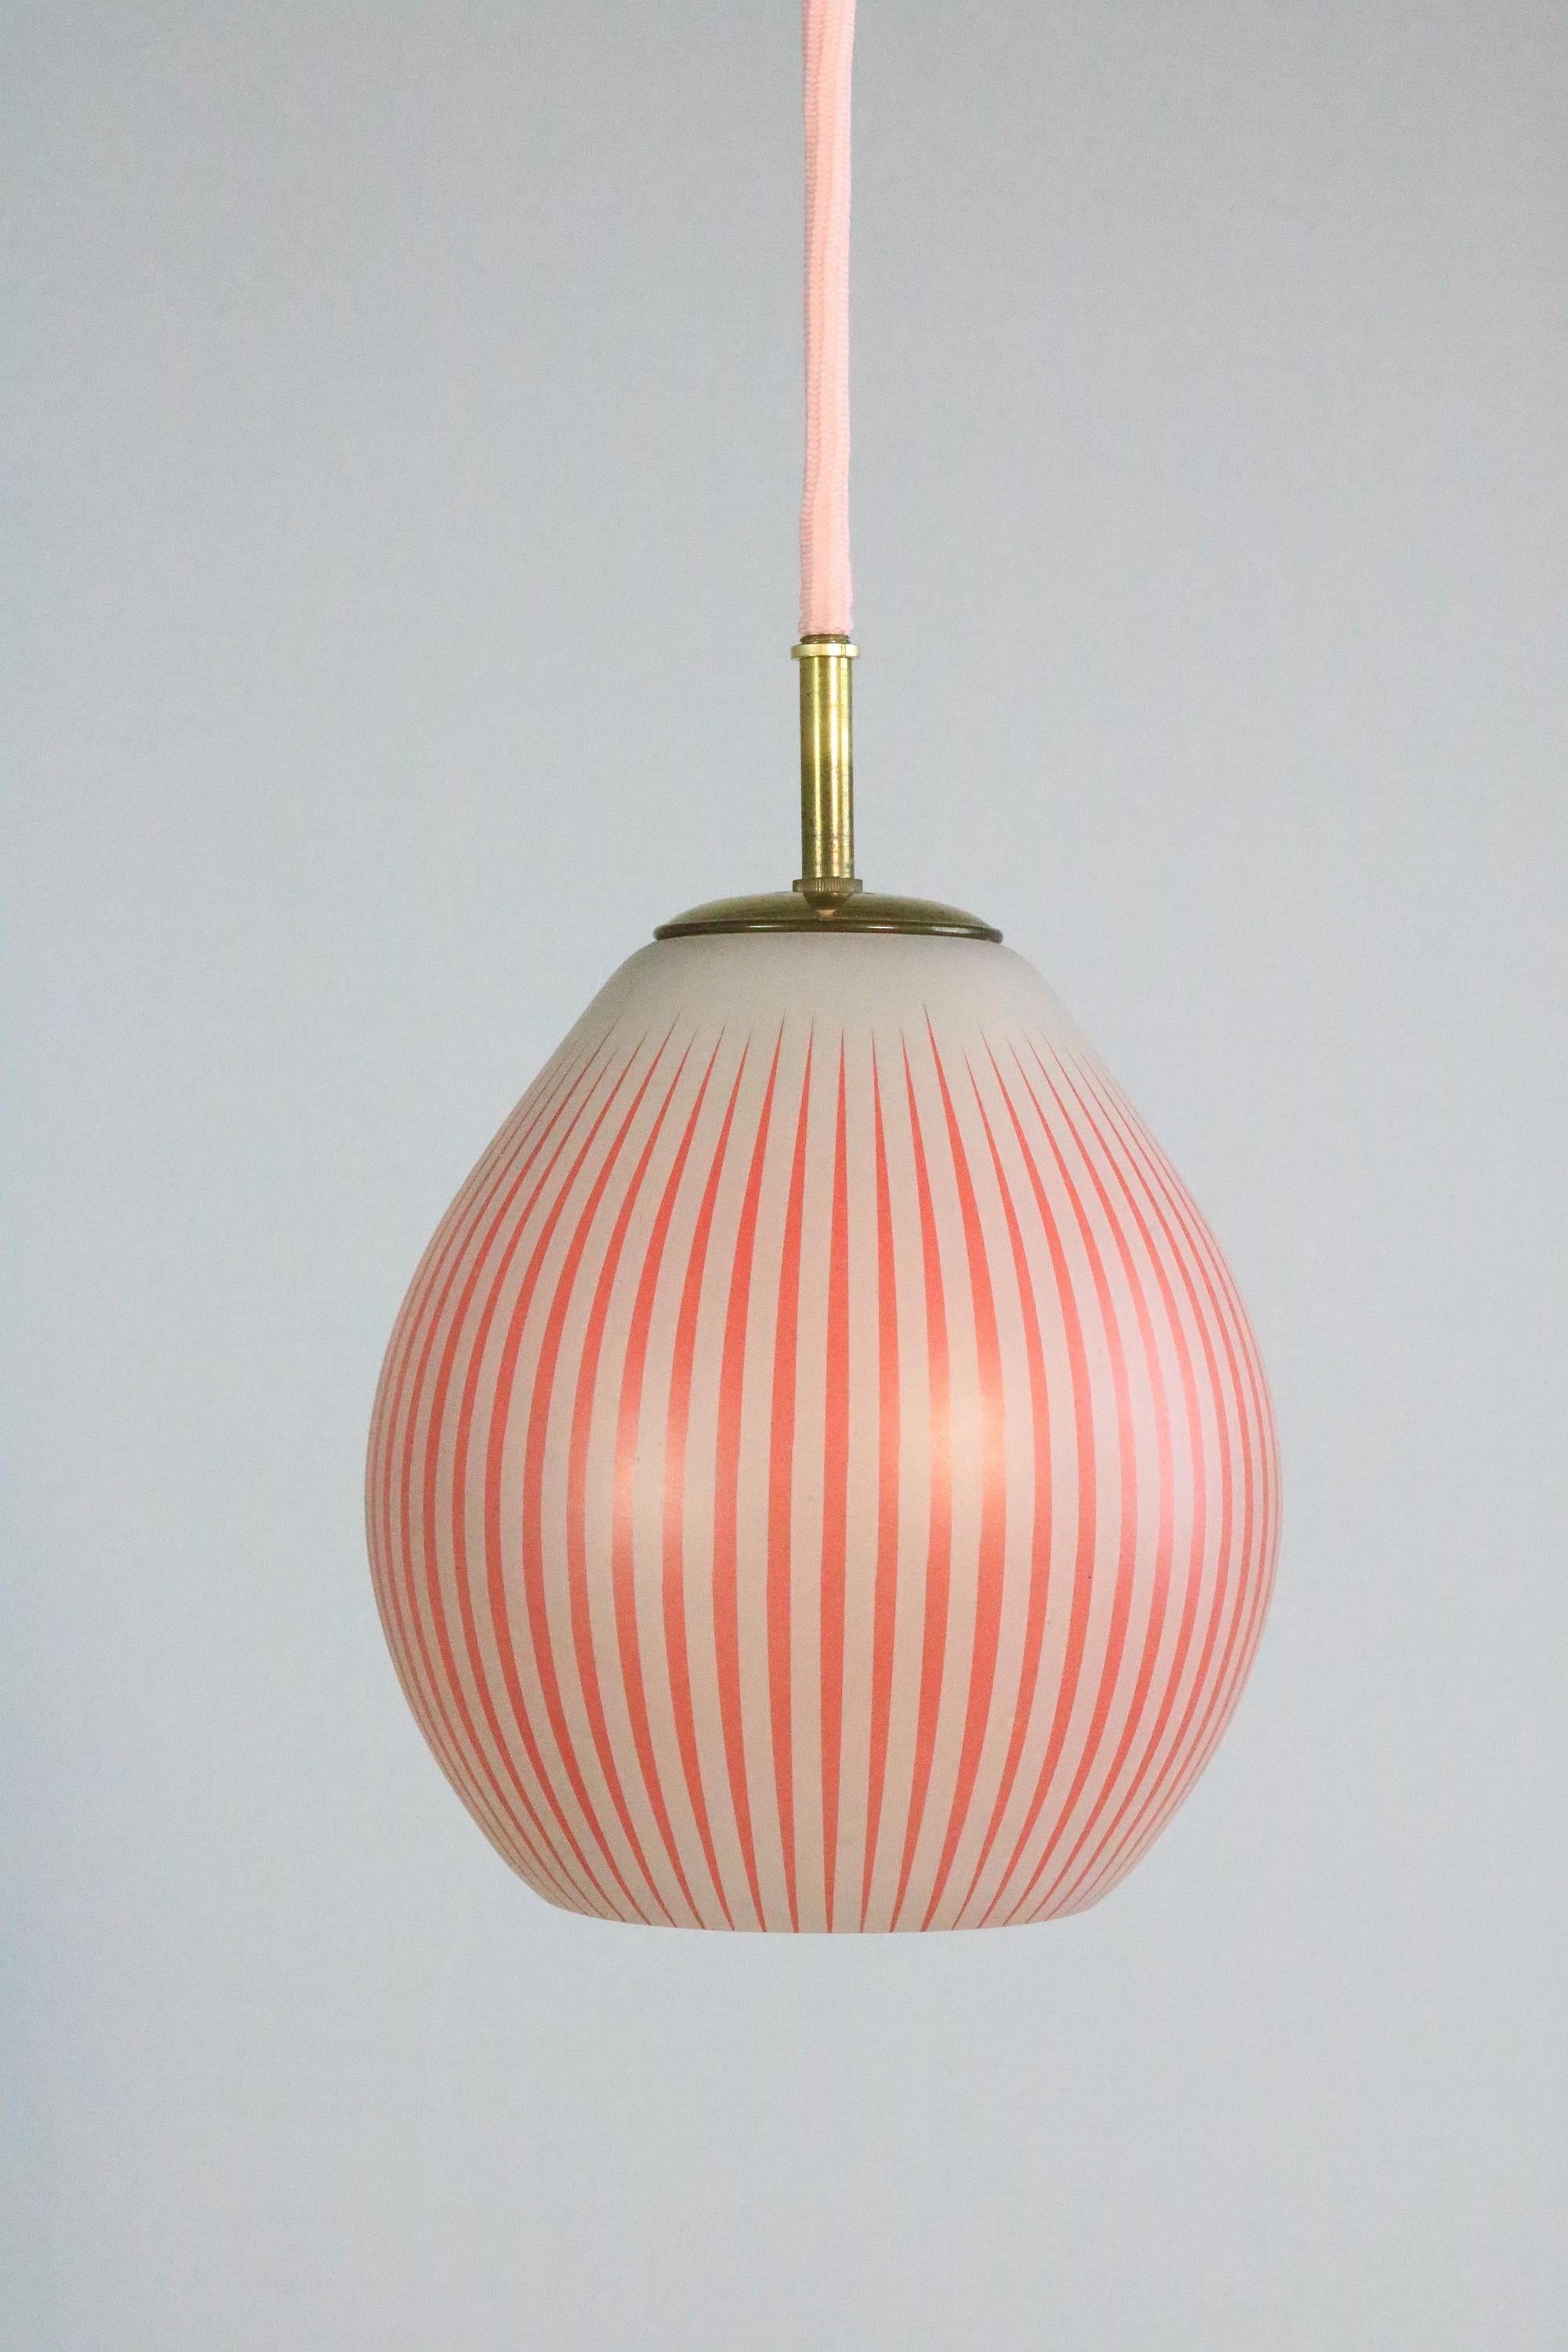 Red and White striped glass lamp. Newly wired with pink colored textile cable. Beautiful brass finish and brass canopy.
The white lamp in matching design you will find in another offer.

Minimal unevenness on the edge of the glass.

Glass height: 20